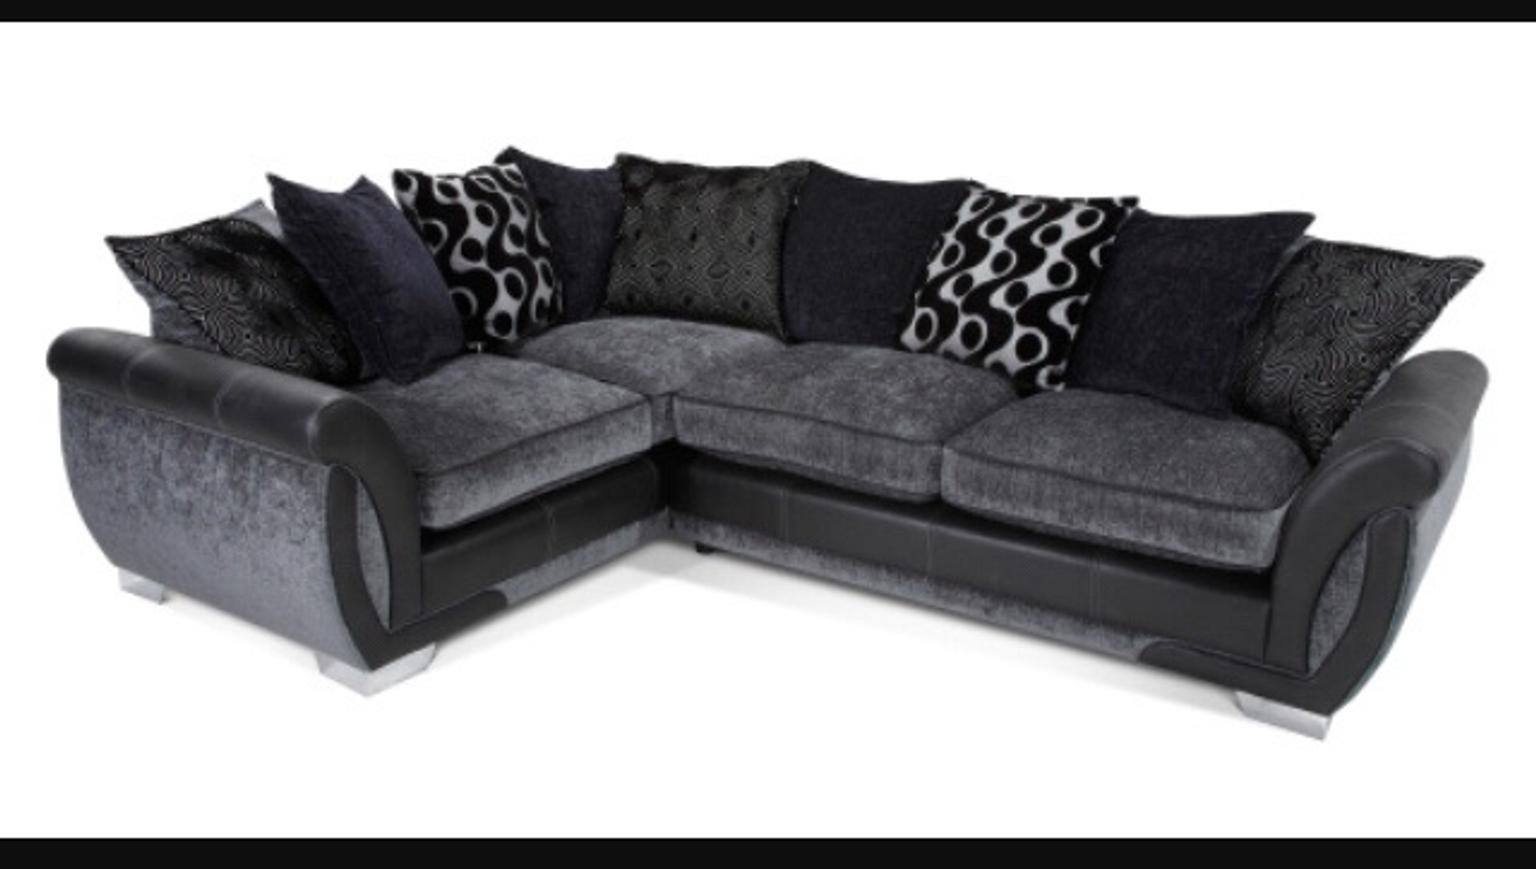 DFS LEFT HAND "SHANNON" CORNER SOFA £300 in NW1 London for £300.00 for sale | Shpock